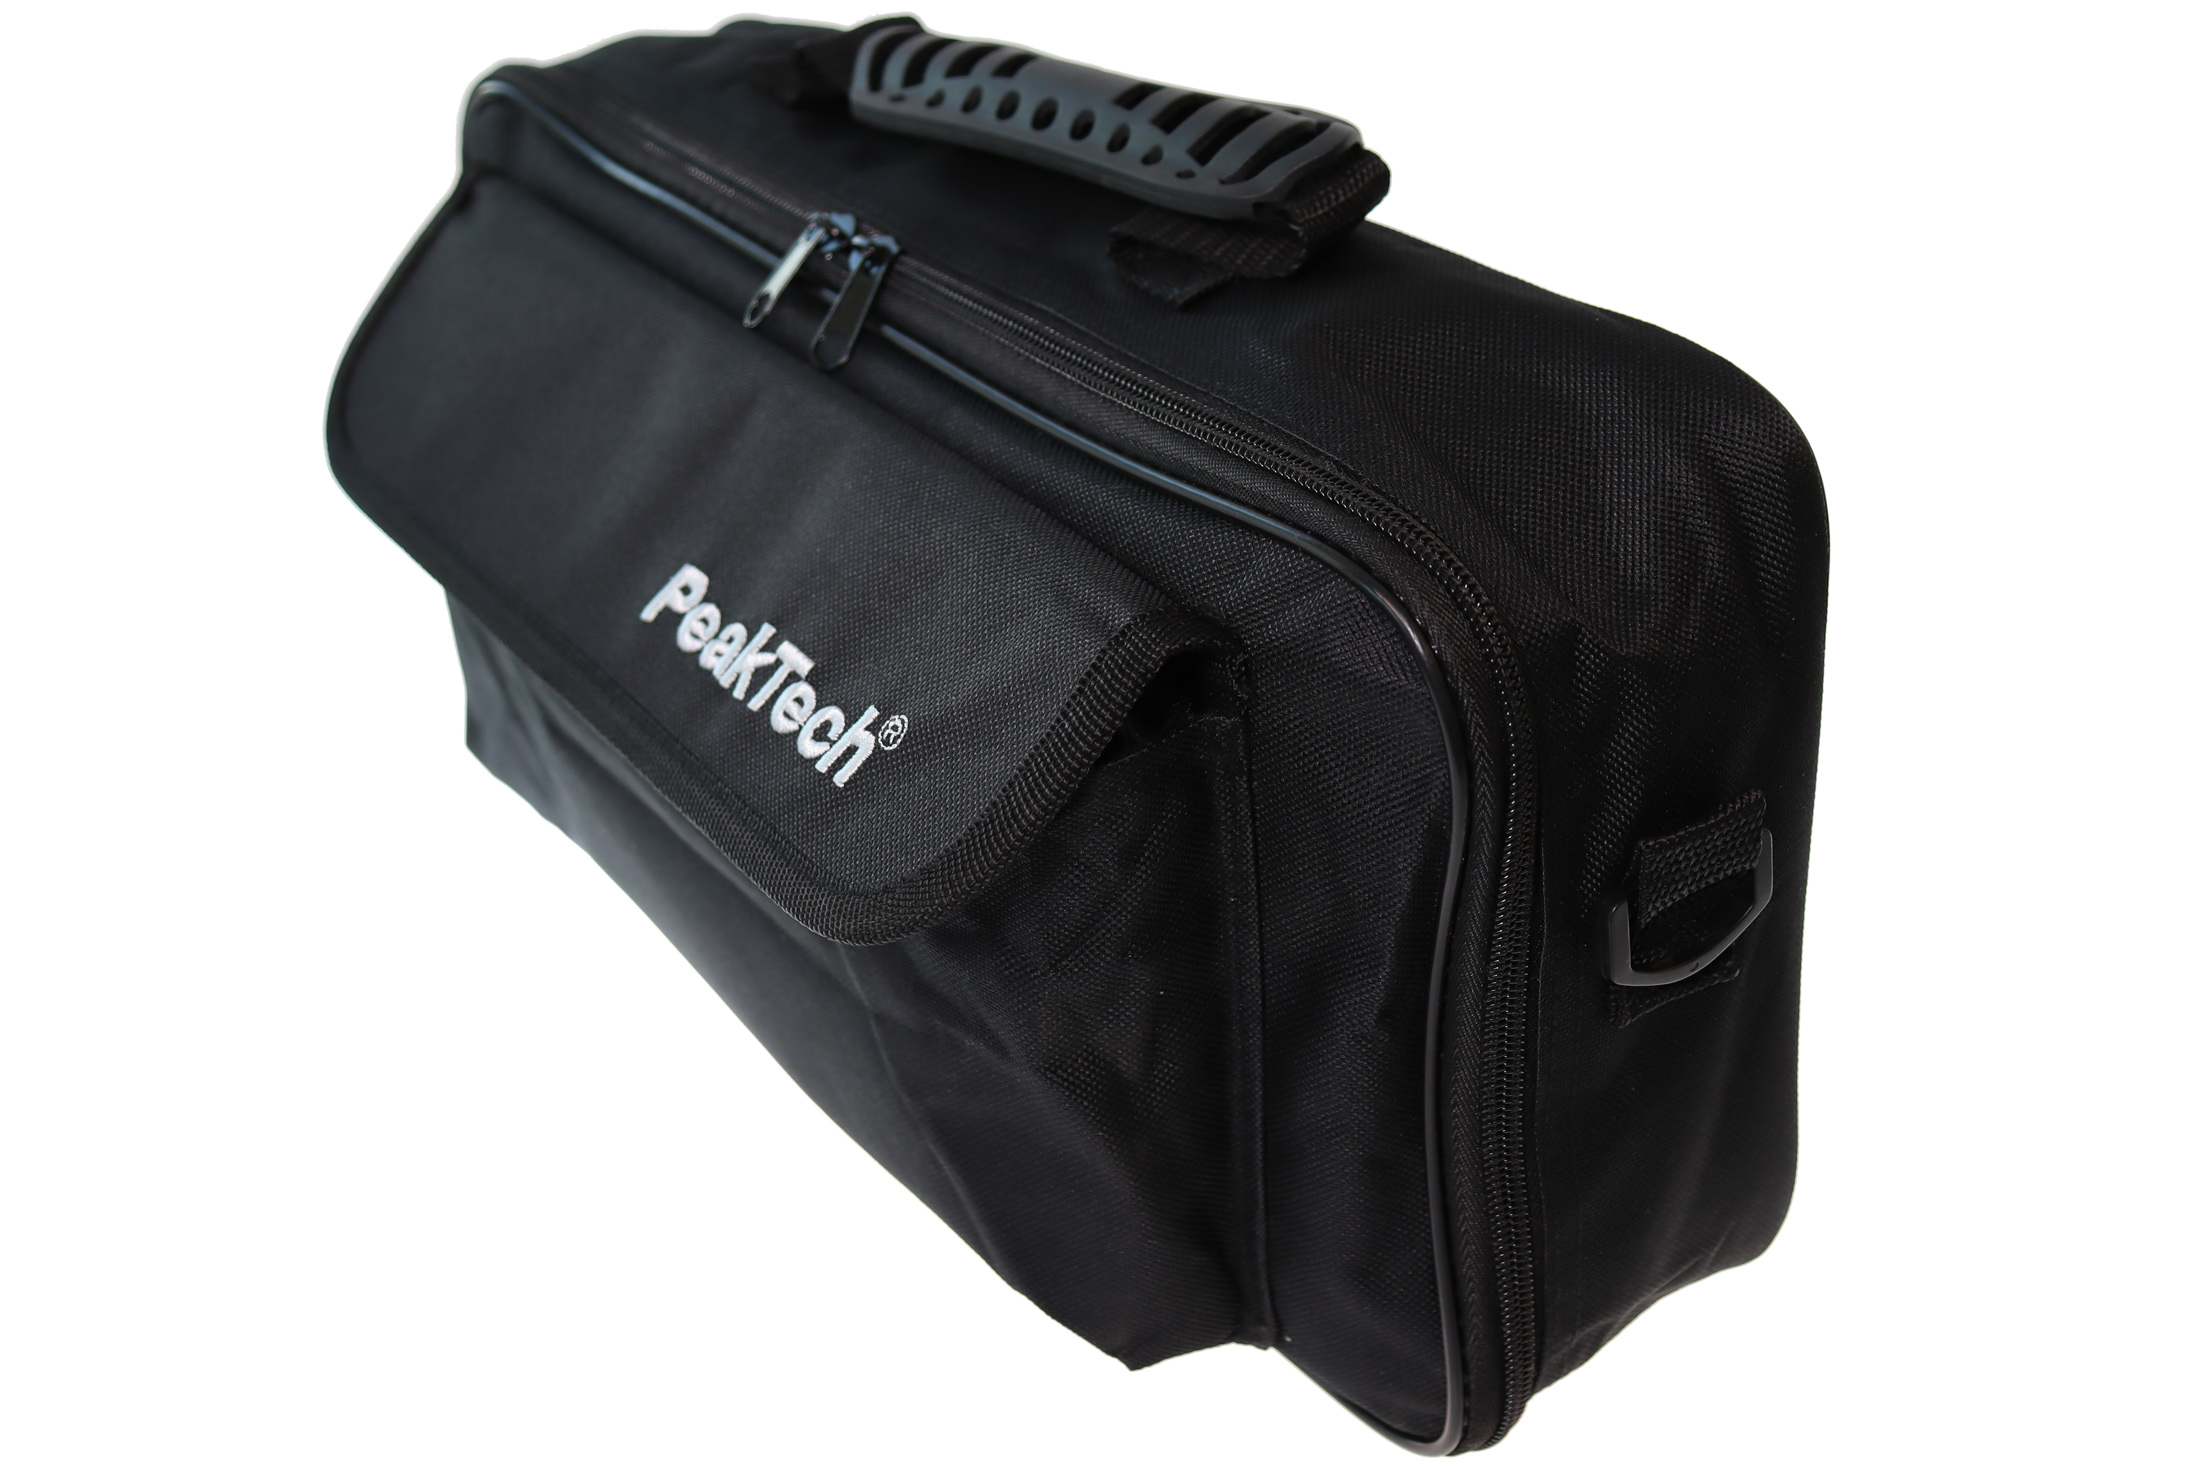 «PeakTech® P 7400» Carrying case for oscilloscopes 380x210x140 mm